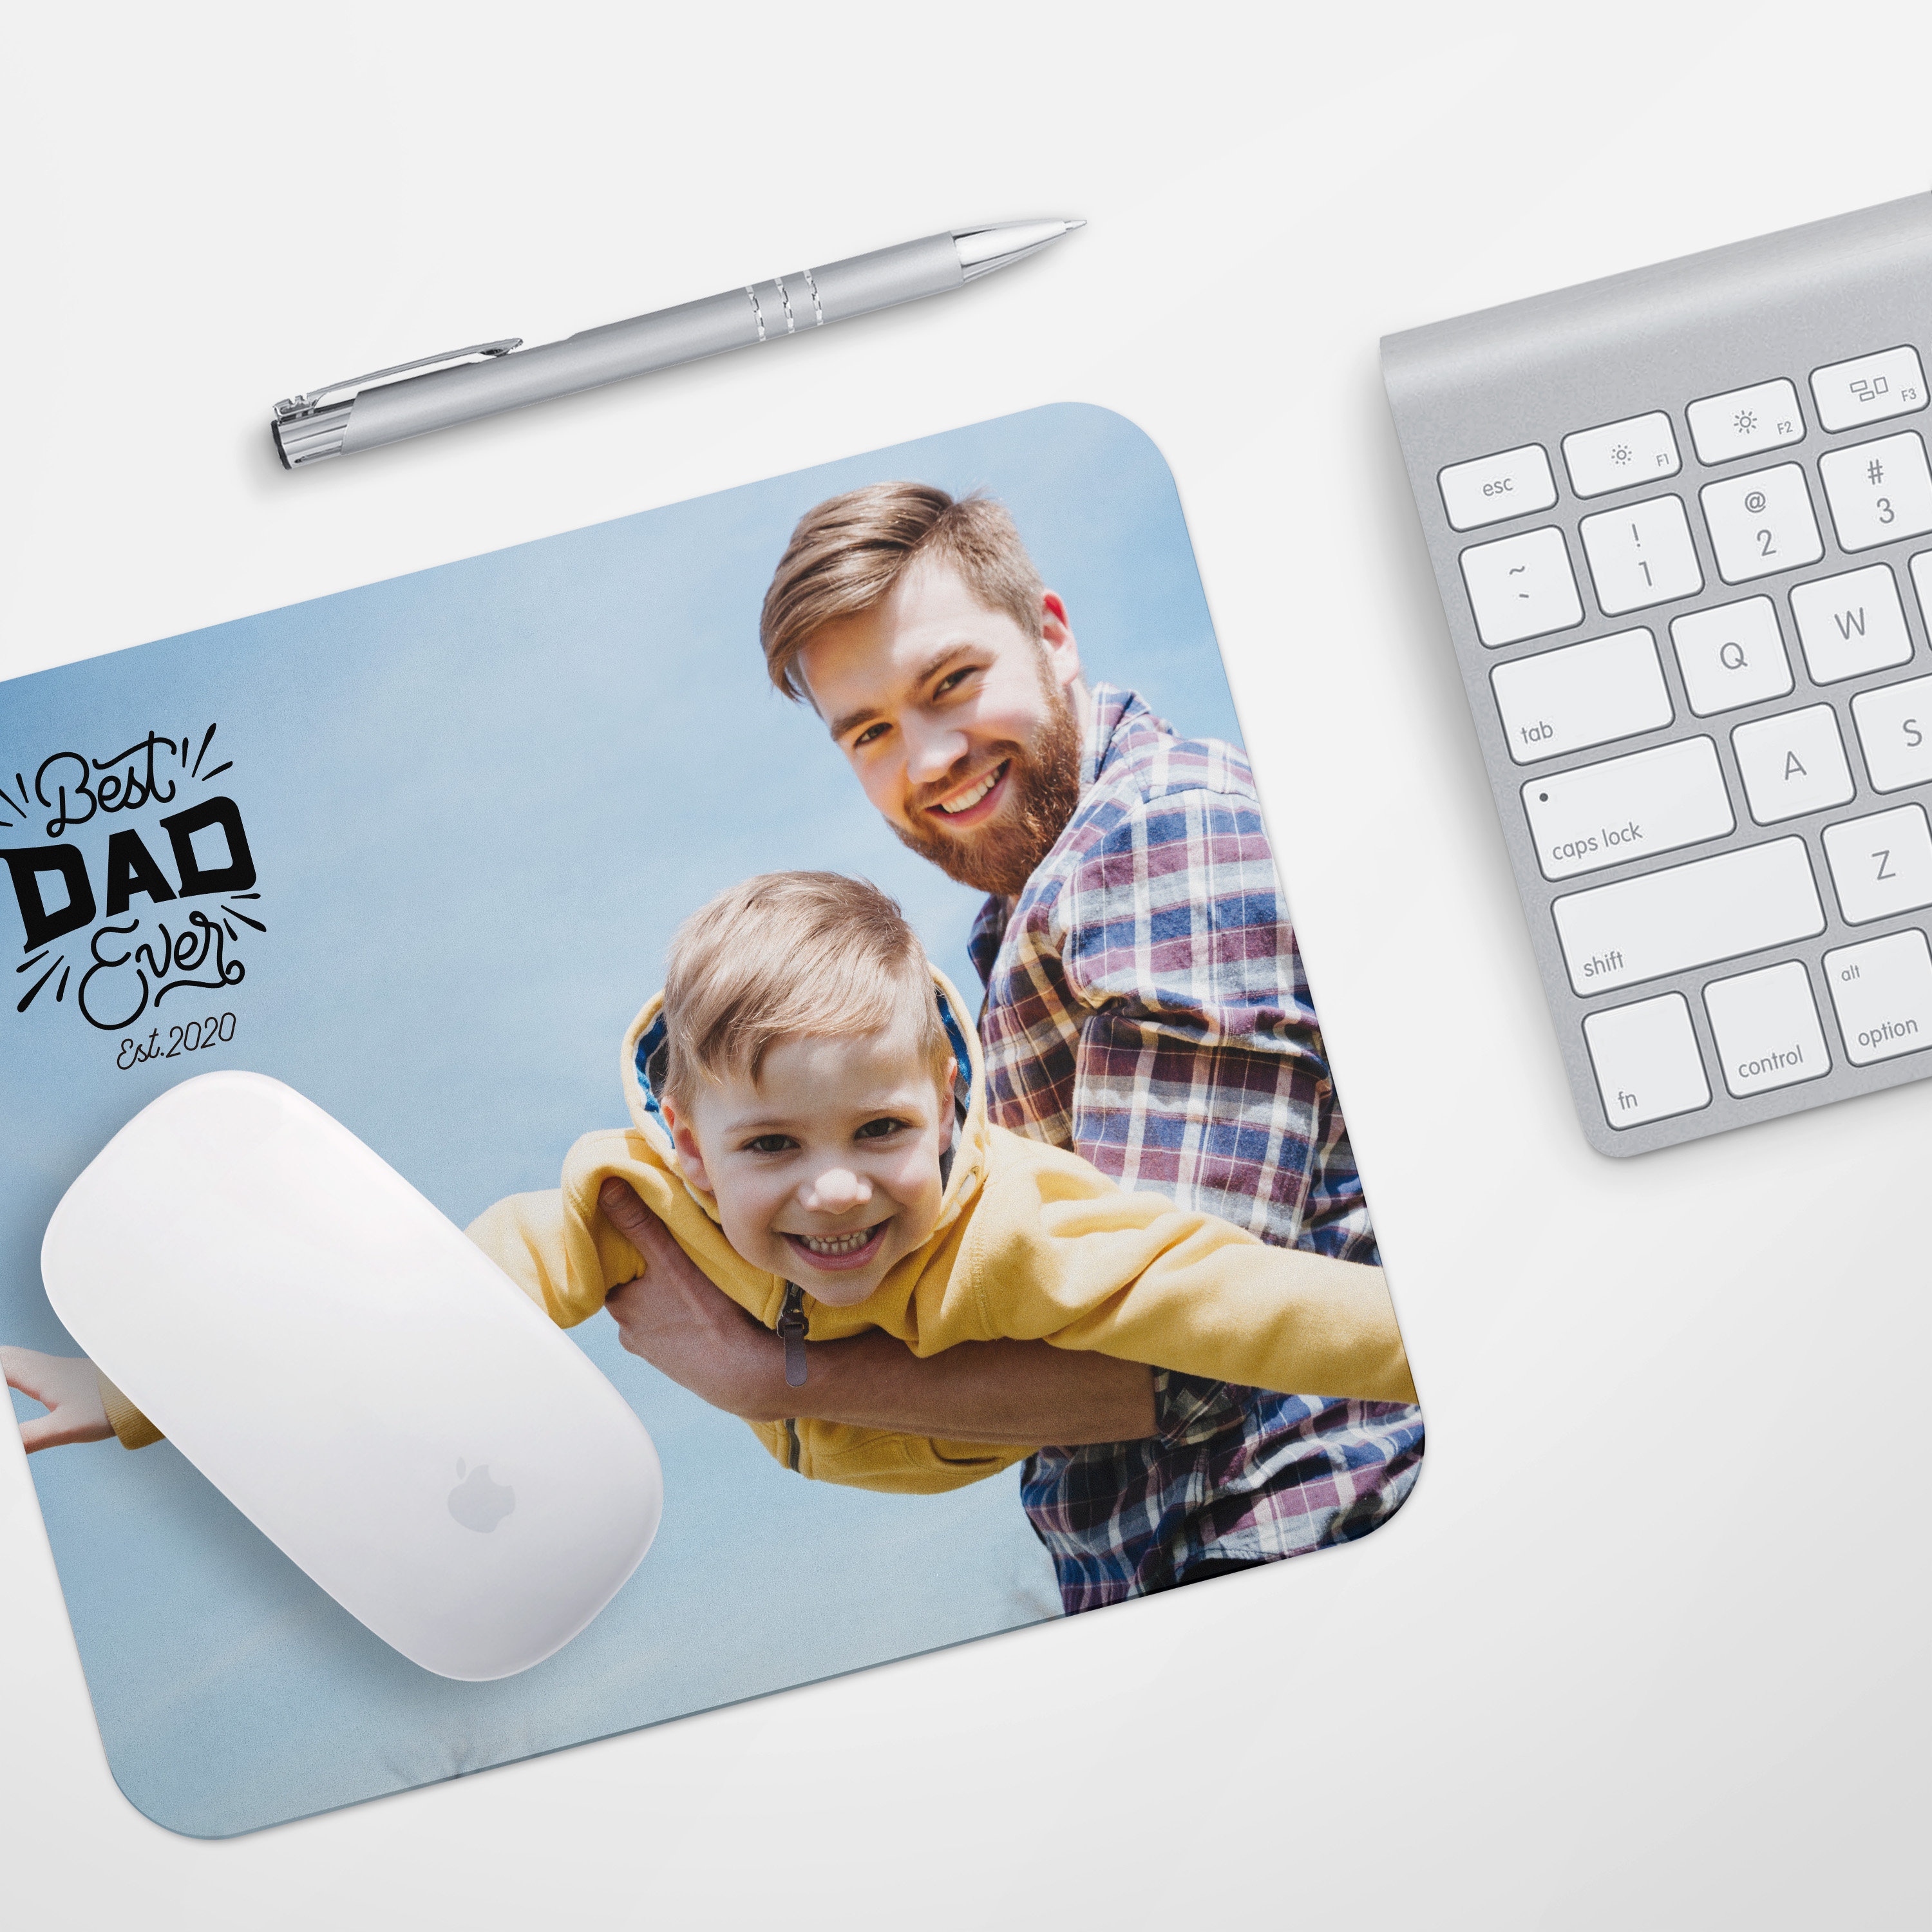 mouse pad sublimation designs, Fathers Day gift idea